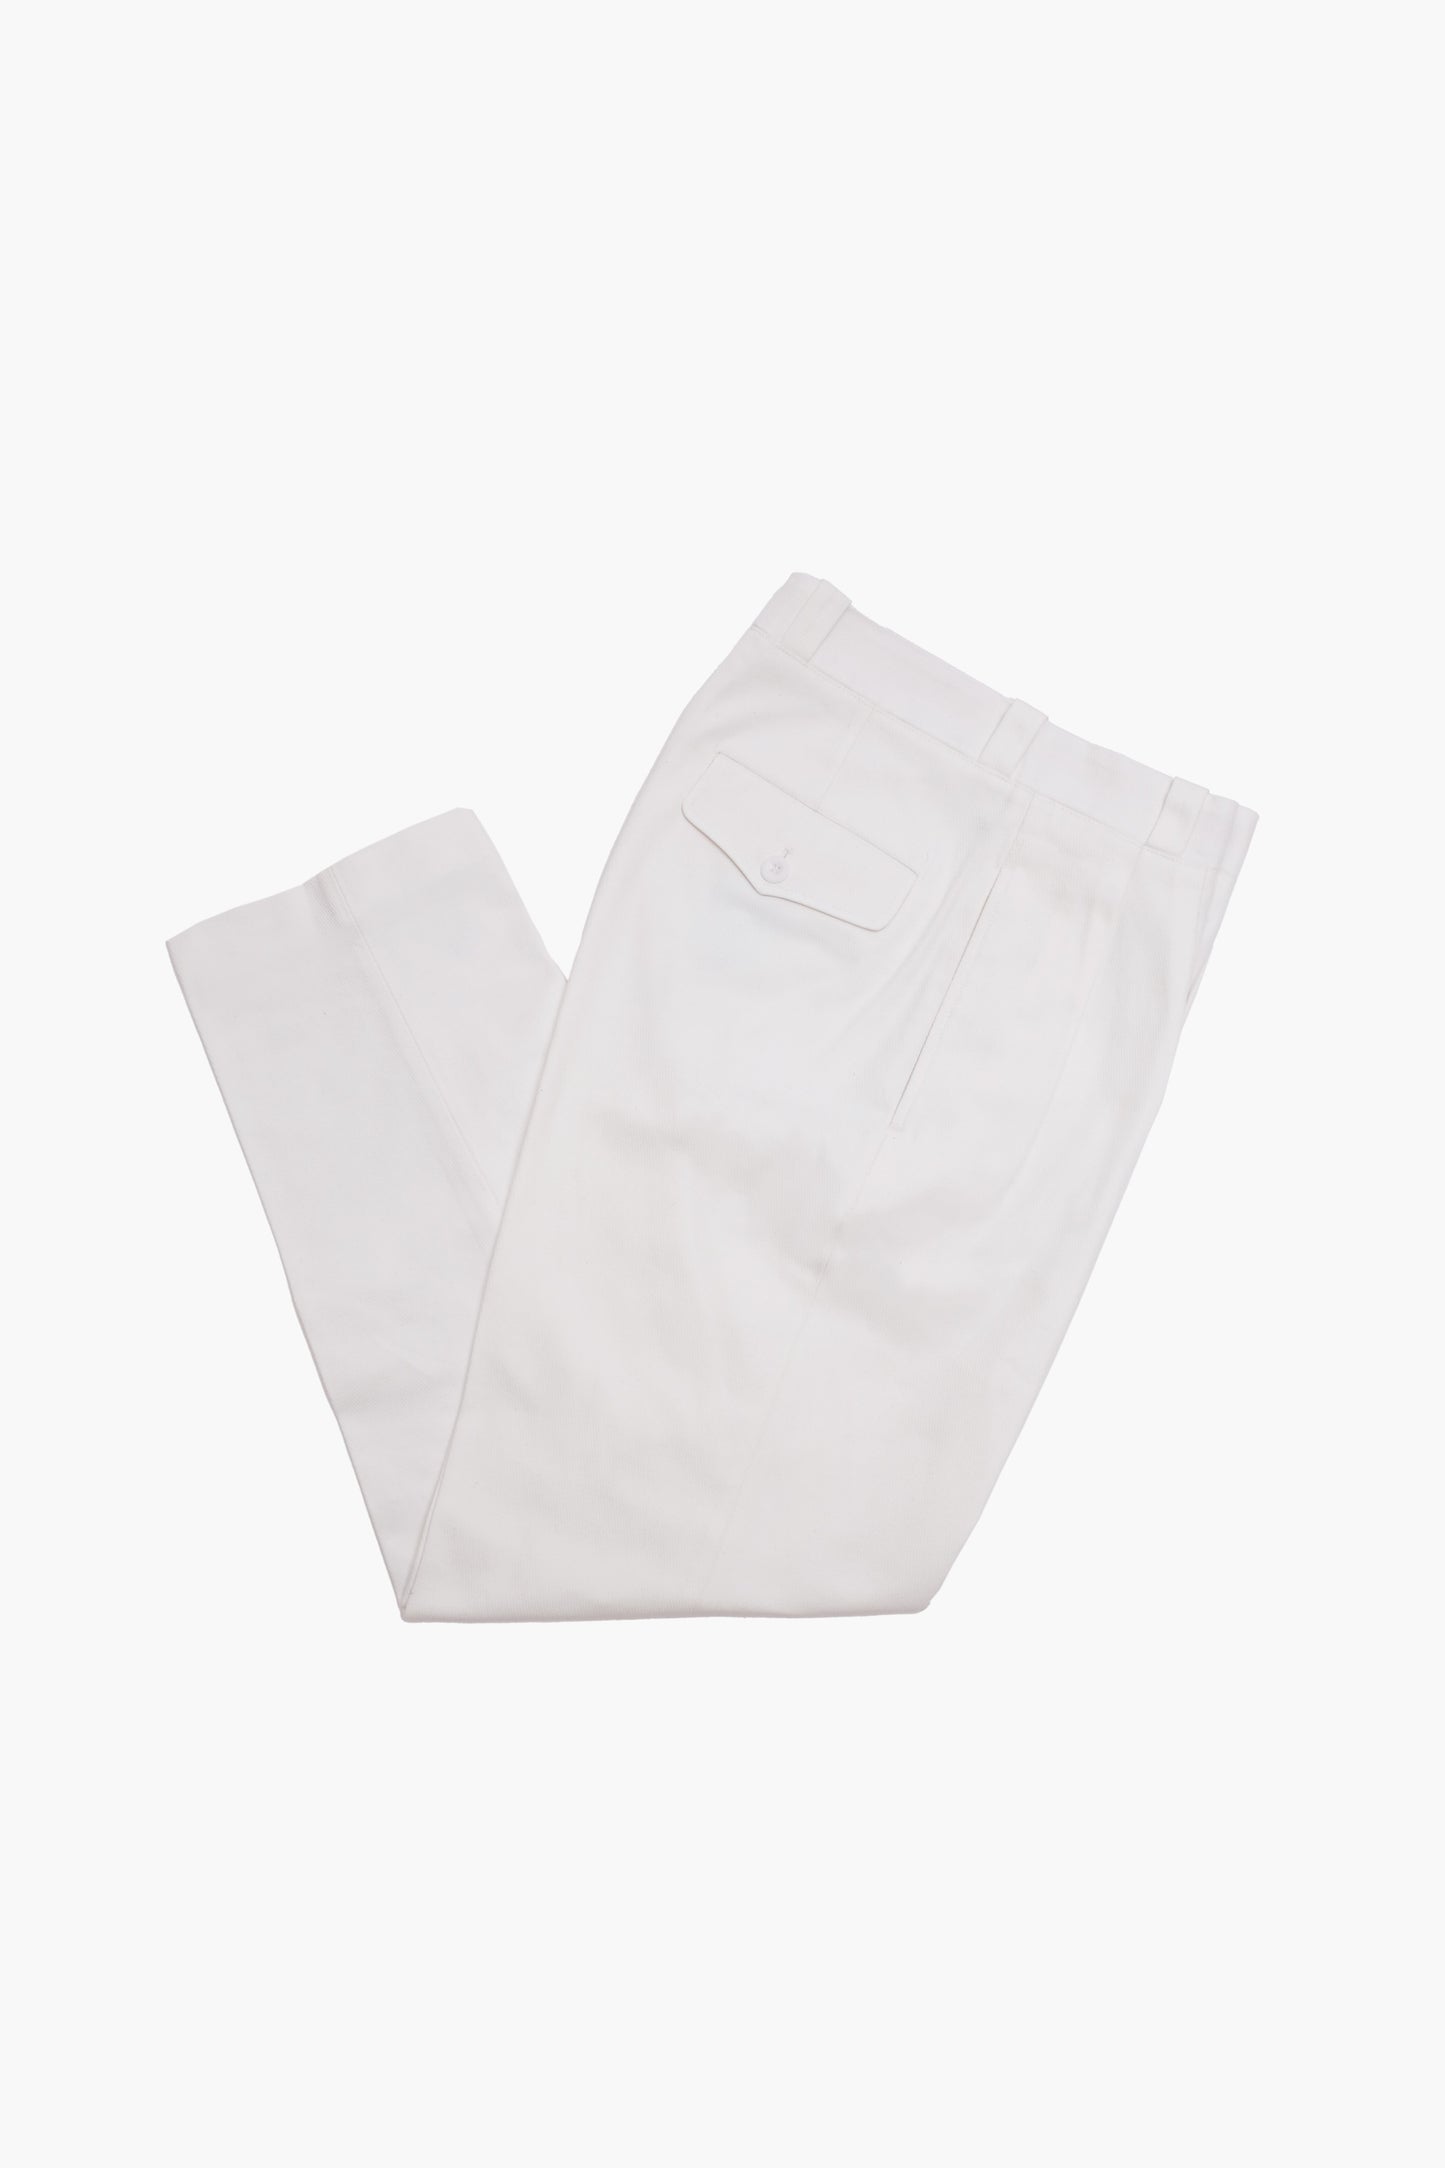 French Military pants in white cotton